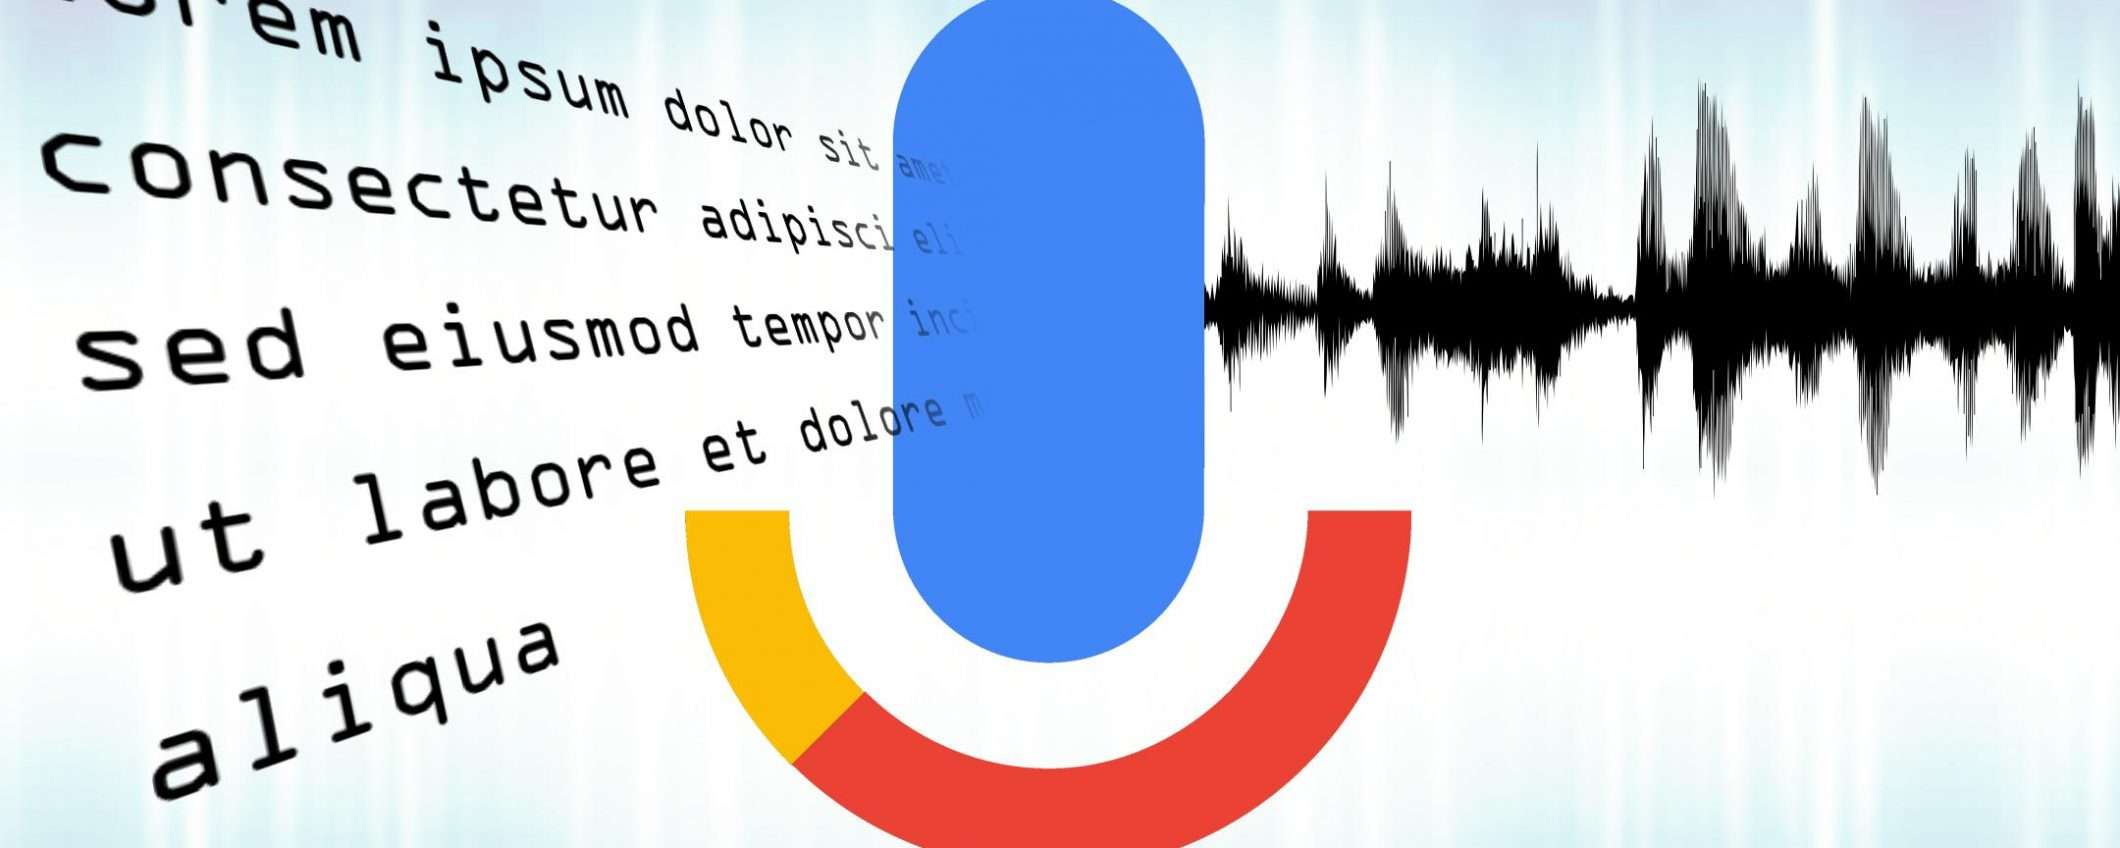 Google Cloud Text-to-Speech, anche in Italiano